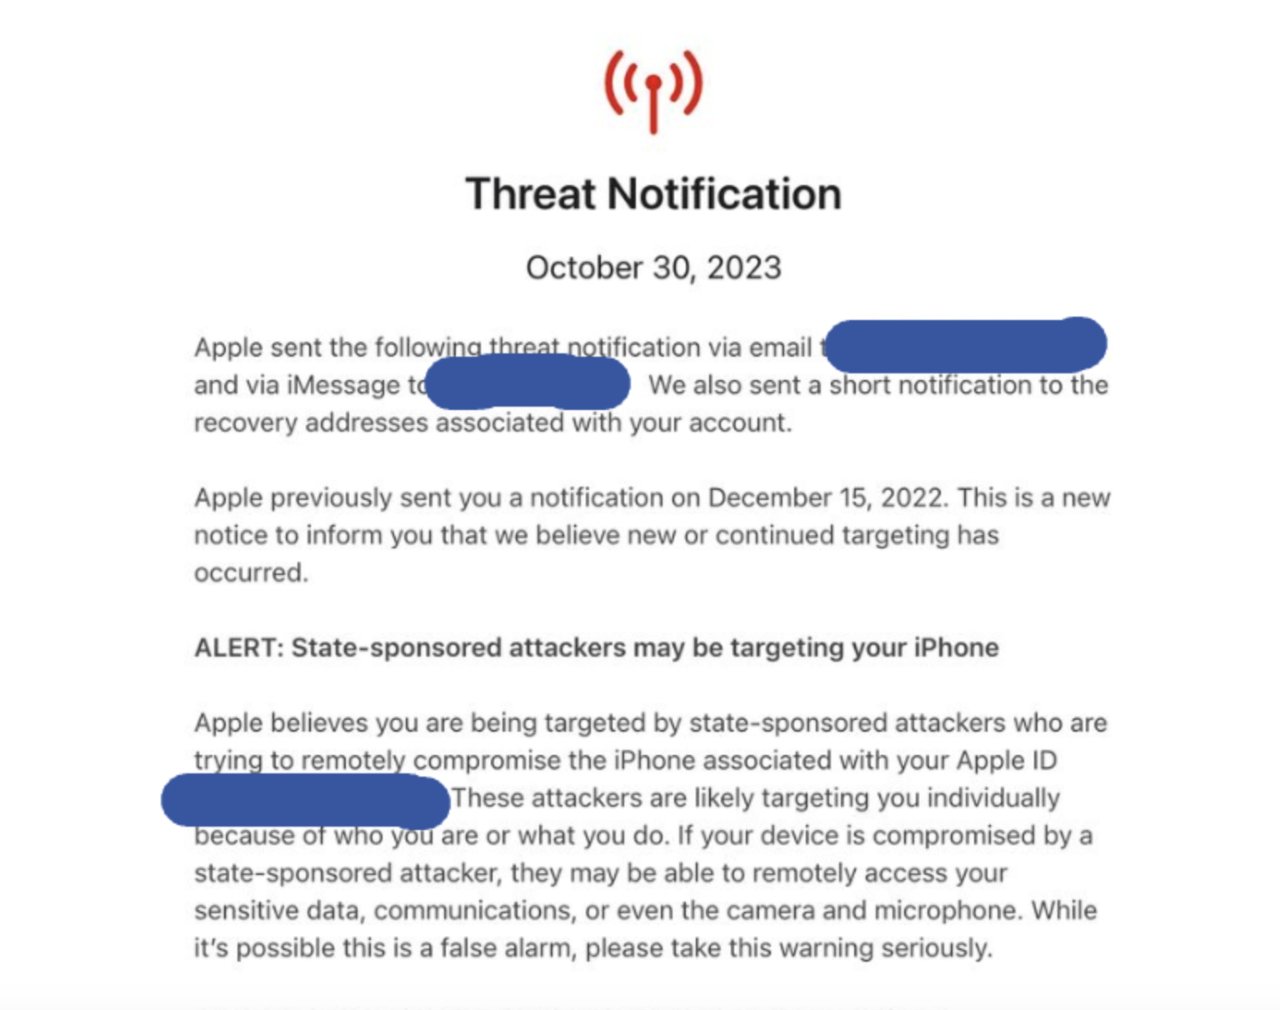 A typical threat alert email (Source: Media.am)